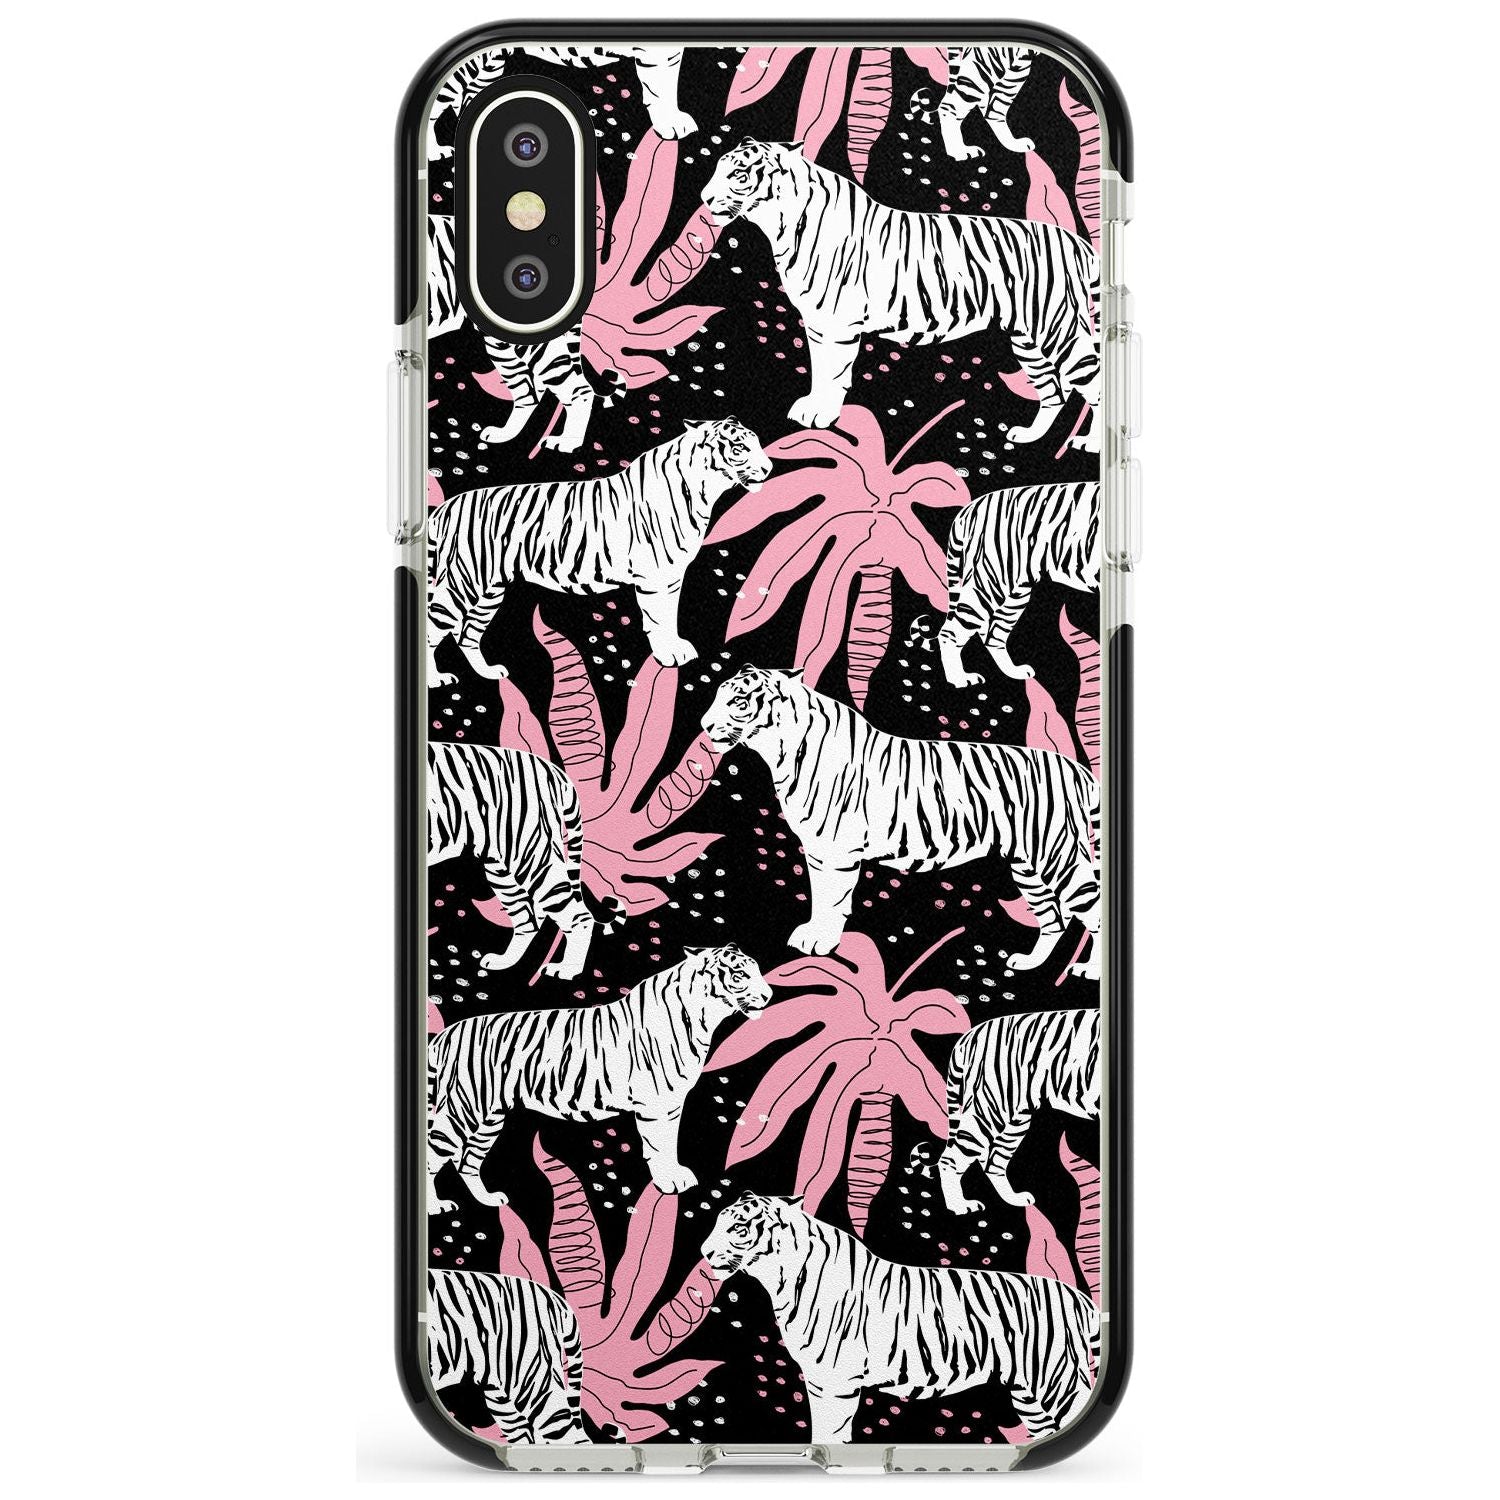 White Tigers on Black Pattern Black Impact Phone Case for iPhone X XS Max XR